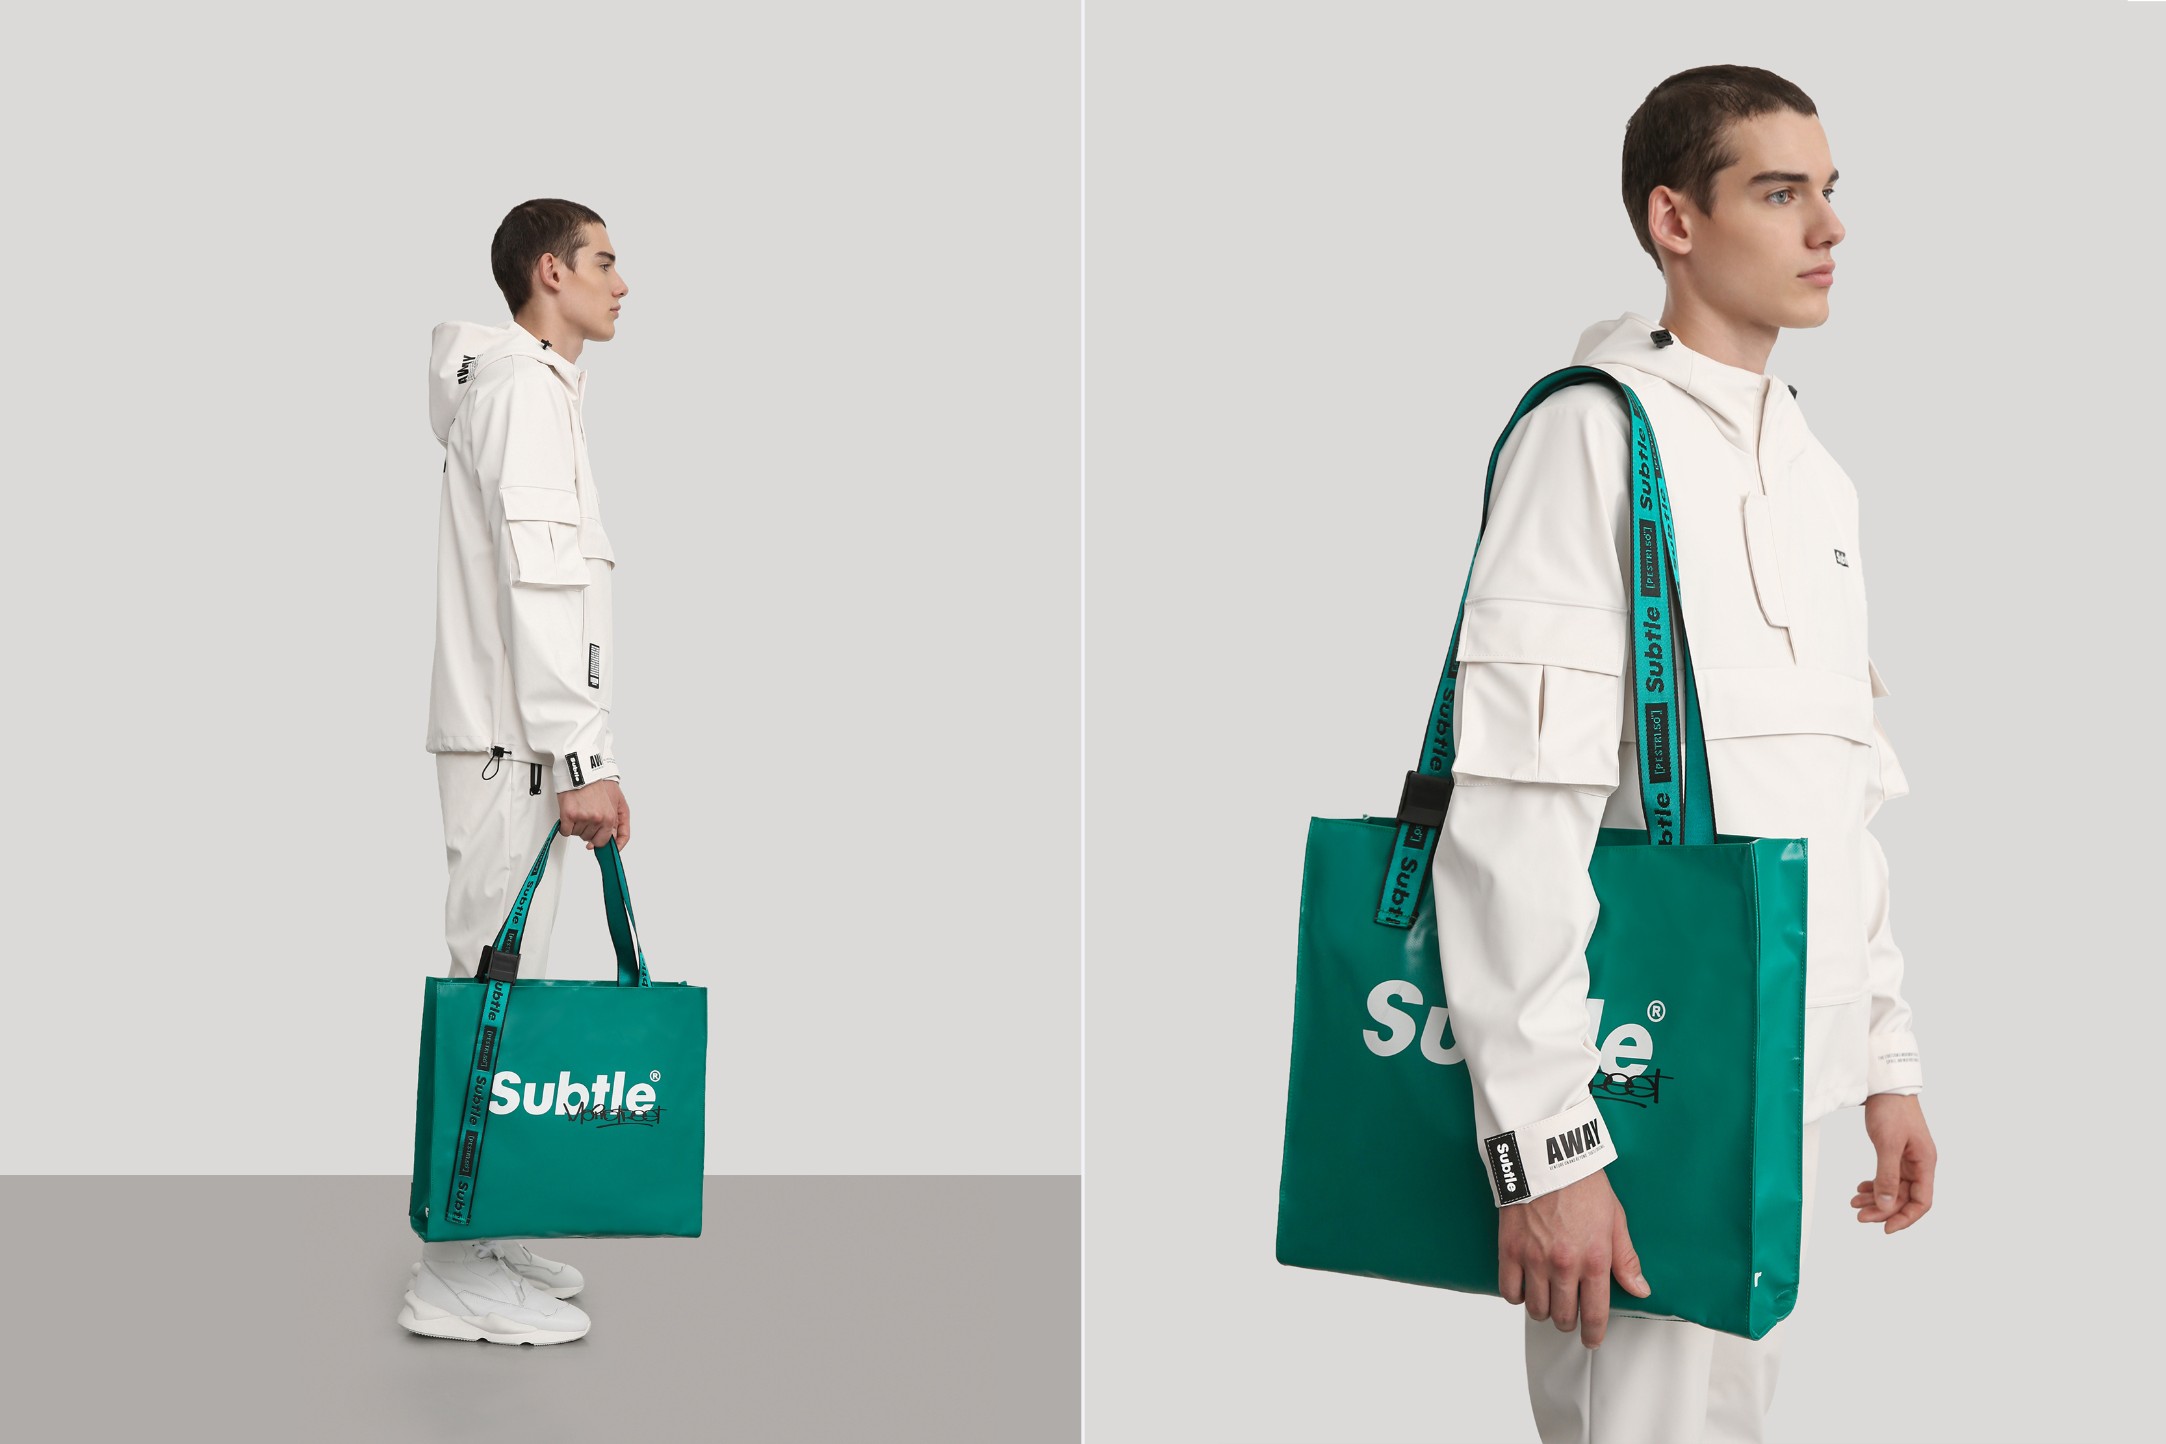 Subtle Premiers Its New 2019 Bag Collection Titled ‘MainStreet’